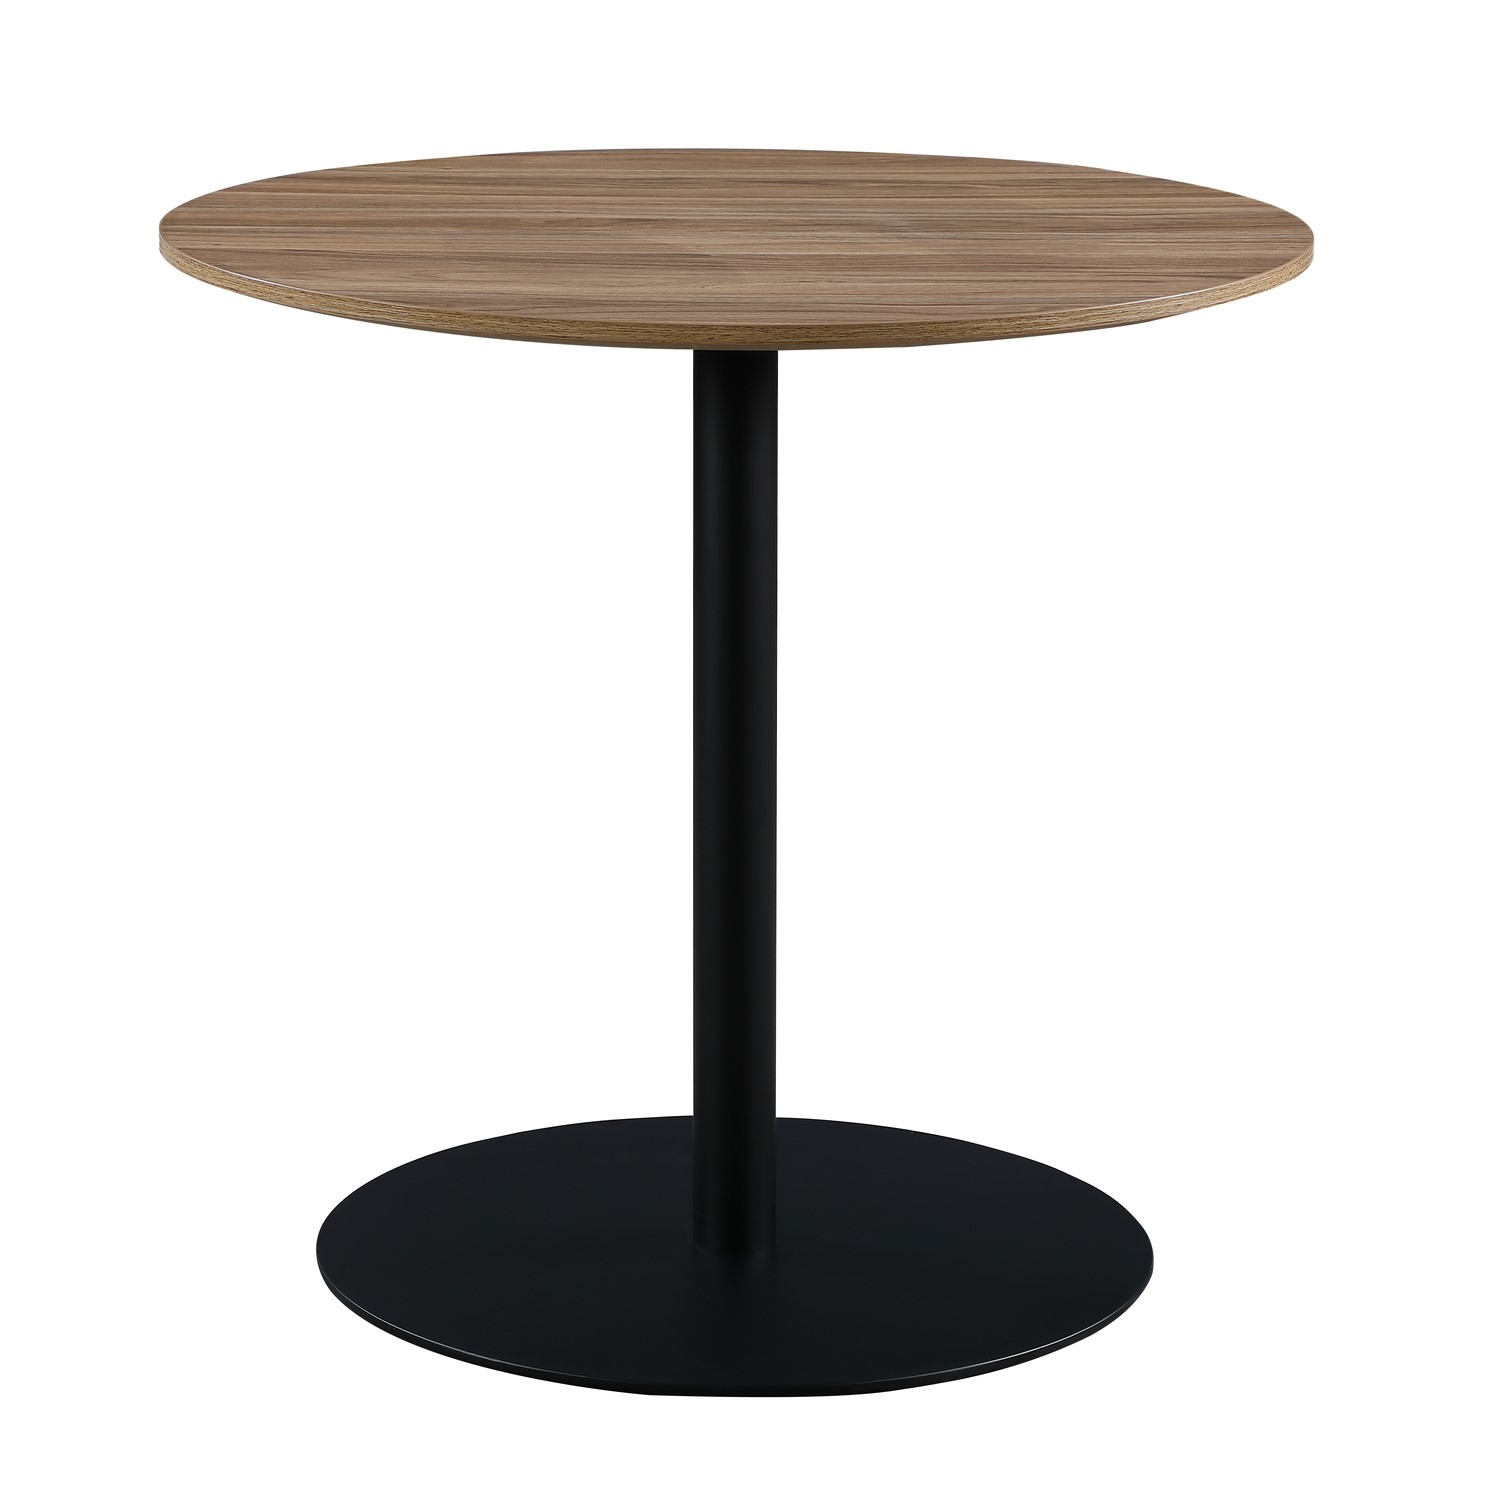 Photo of Small round walnut dining table -liberty